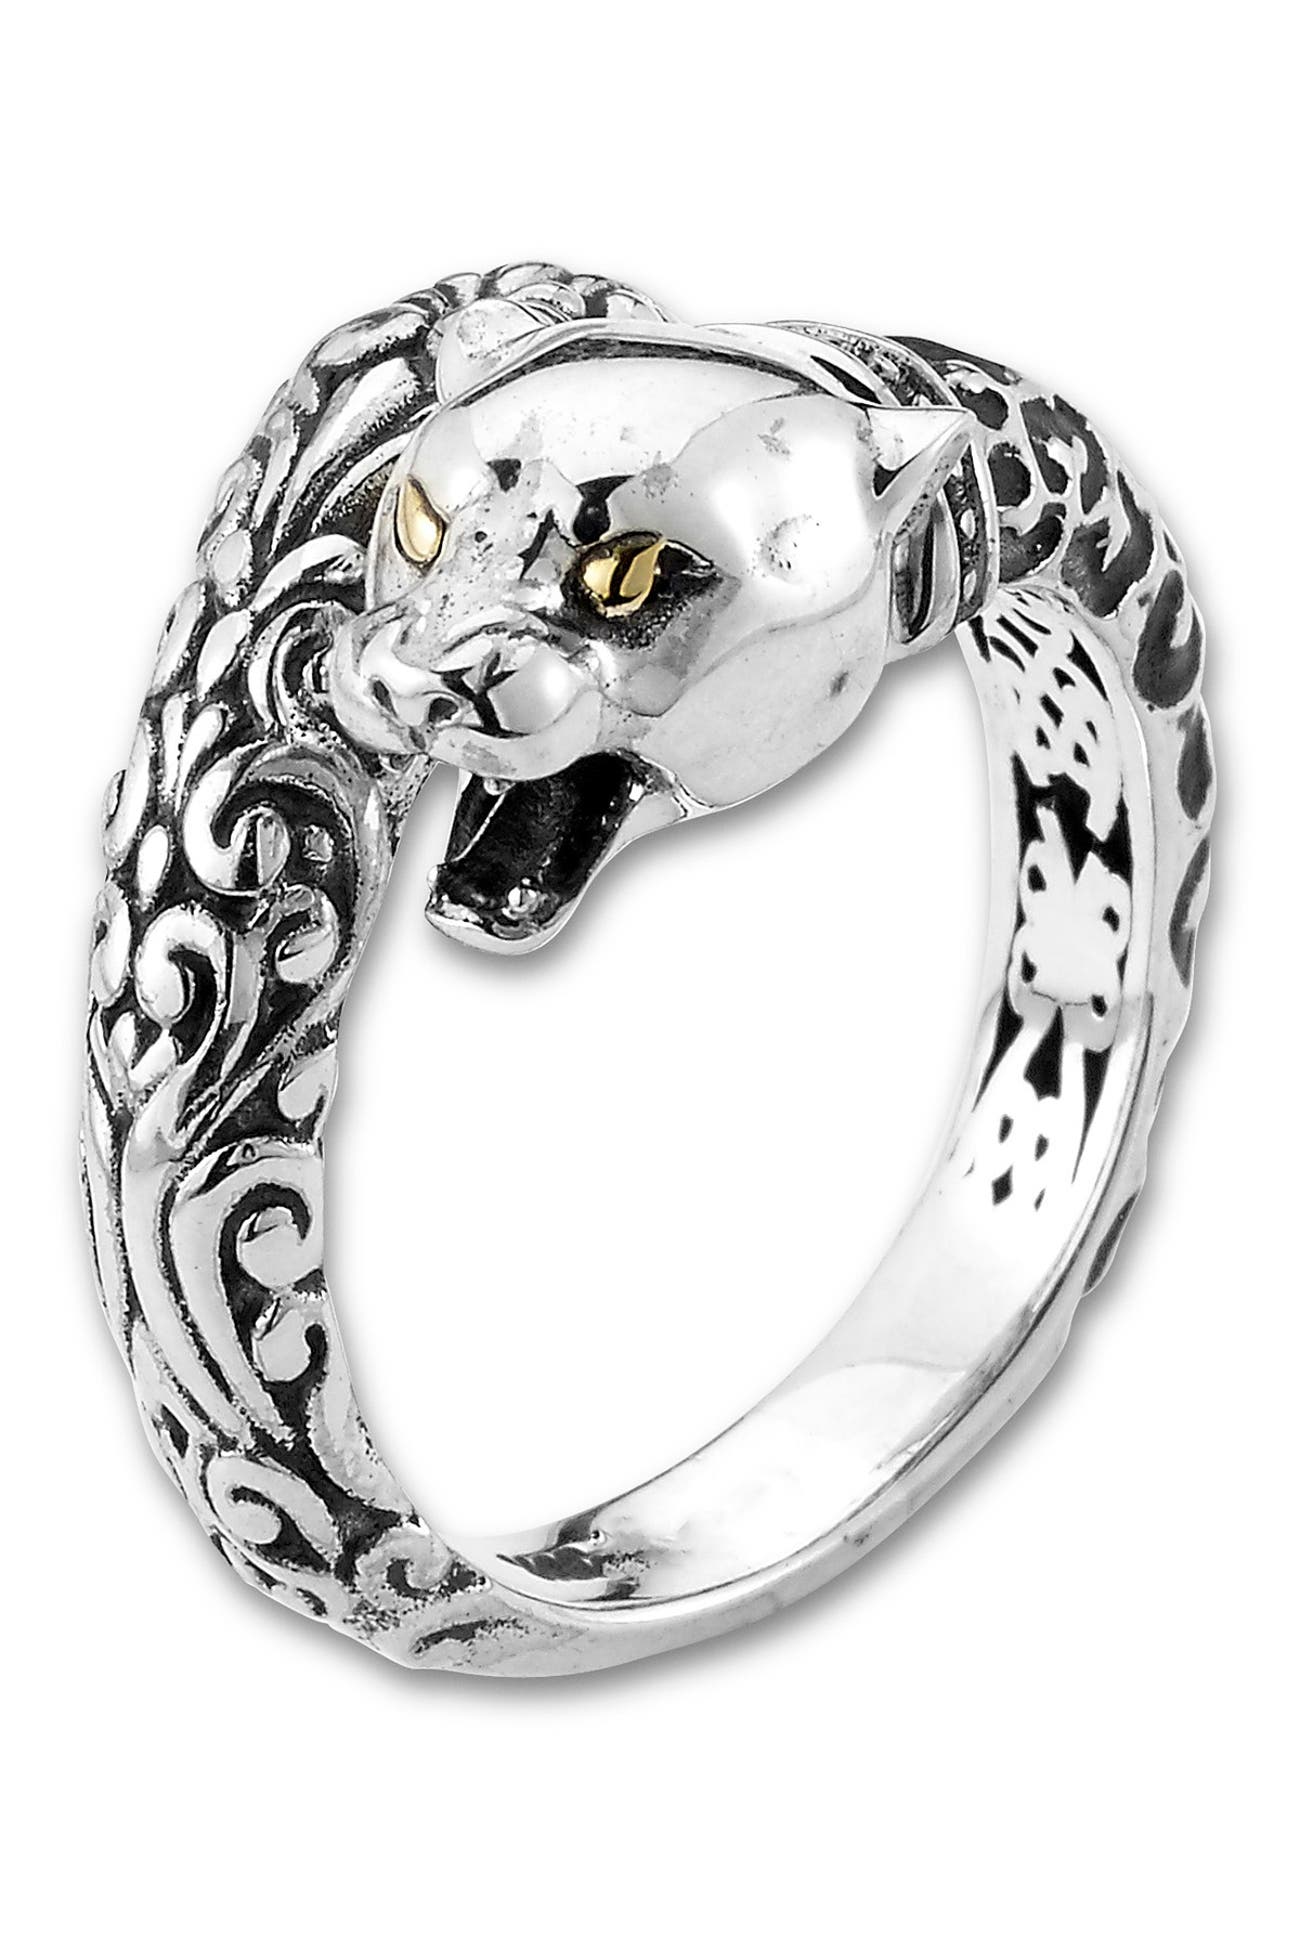 Samuel B Jewelry Sterling Silver And 18k Gold Panther